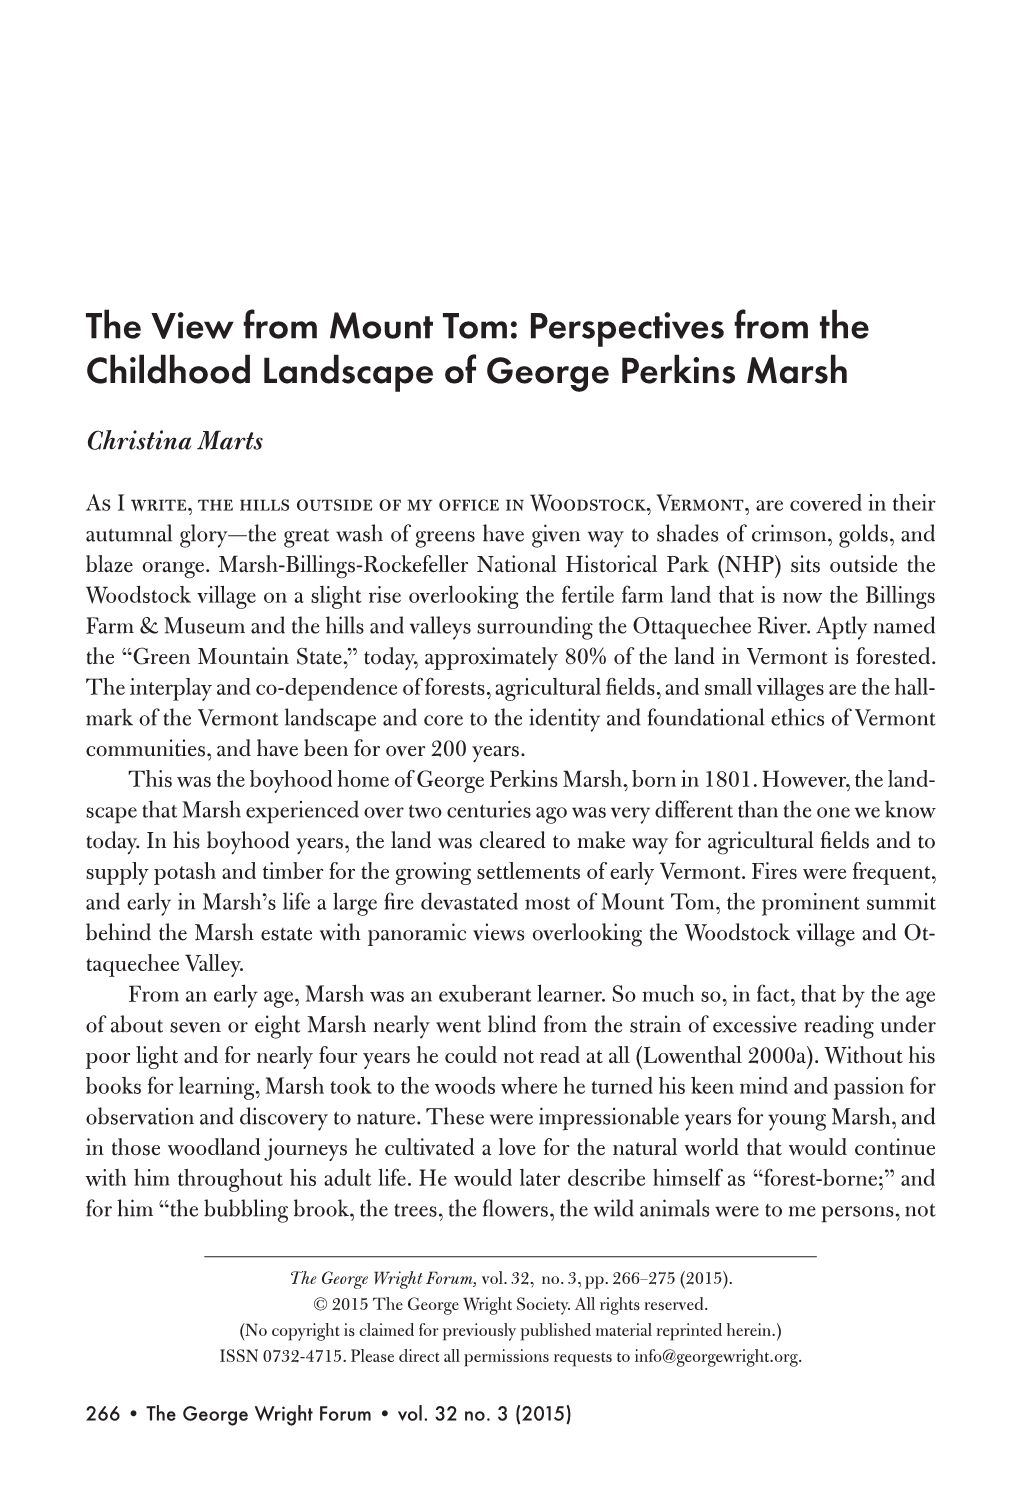 The View from Mount Tom: Perspectives from the Childhood Landscape of George Perkins Marsh